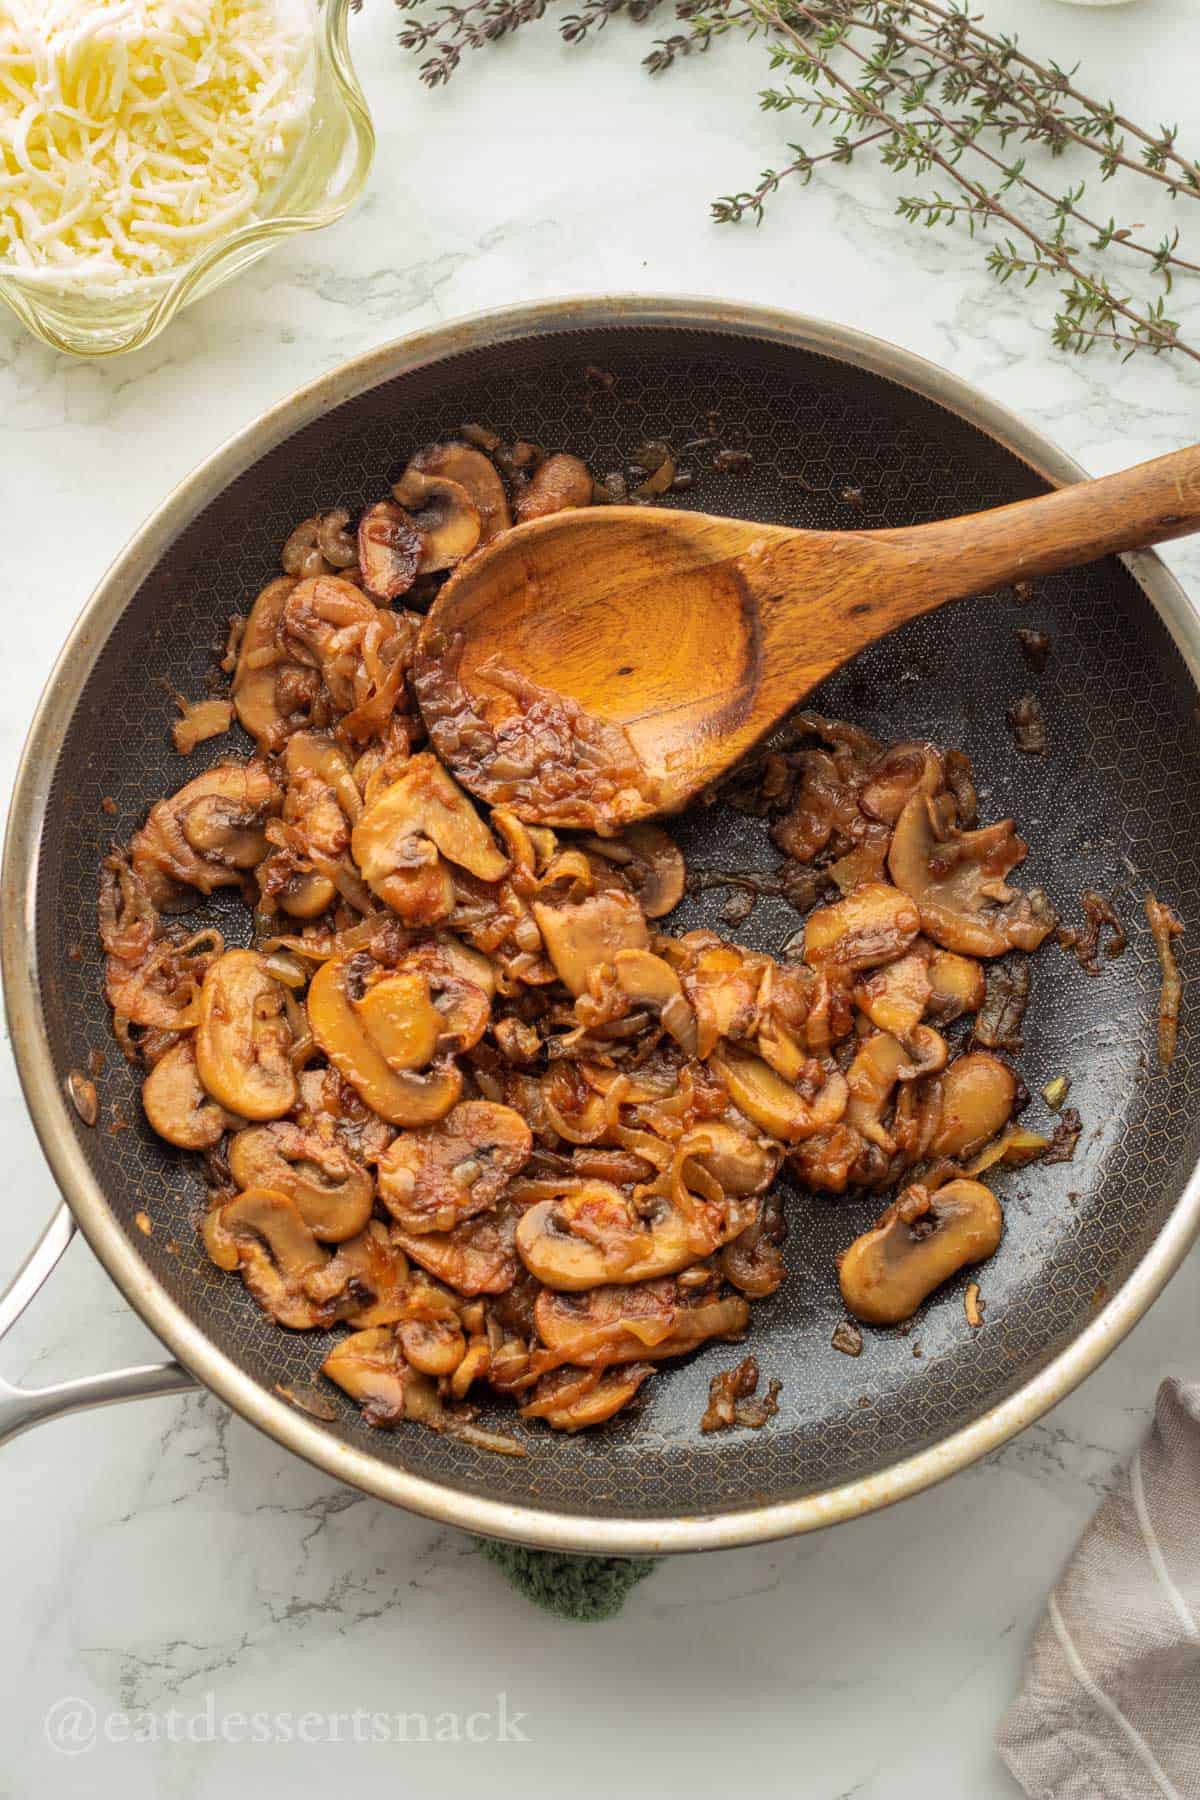 Cooked mushrooms and onions with wooden spoon in metal pan.